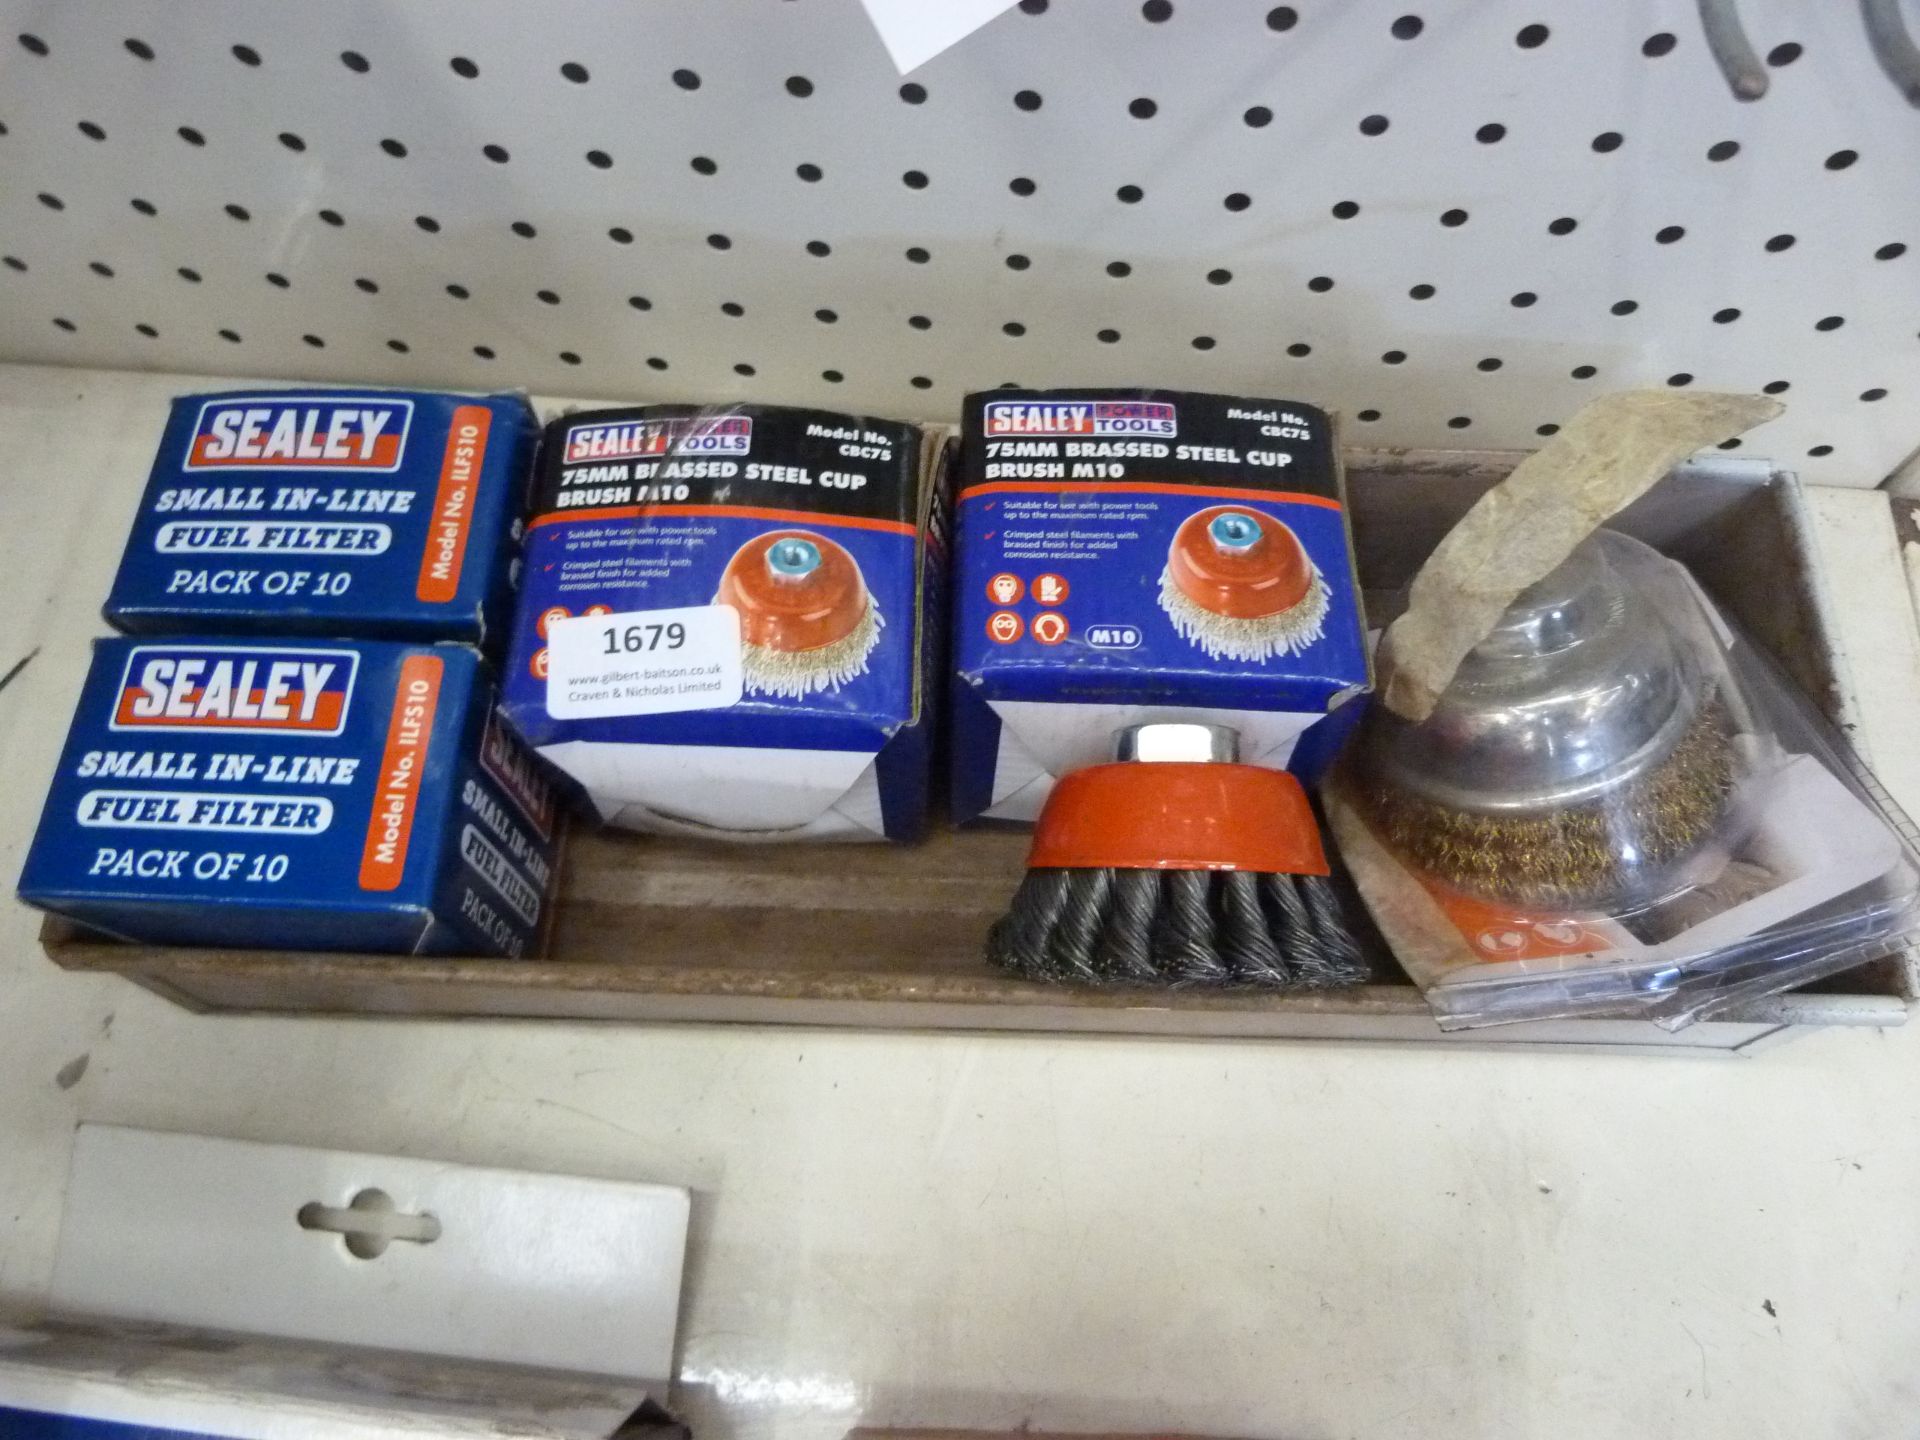 *Two Small Inline Fuel Filters and Four Steel Cup Brushes